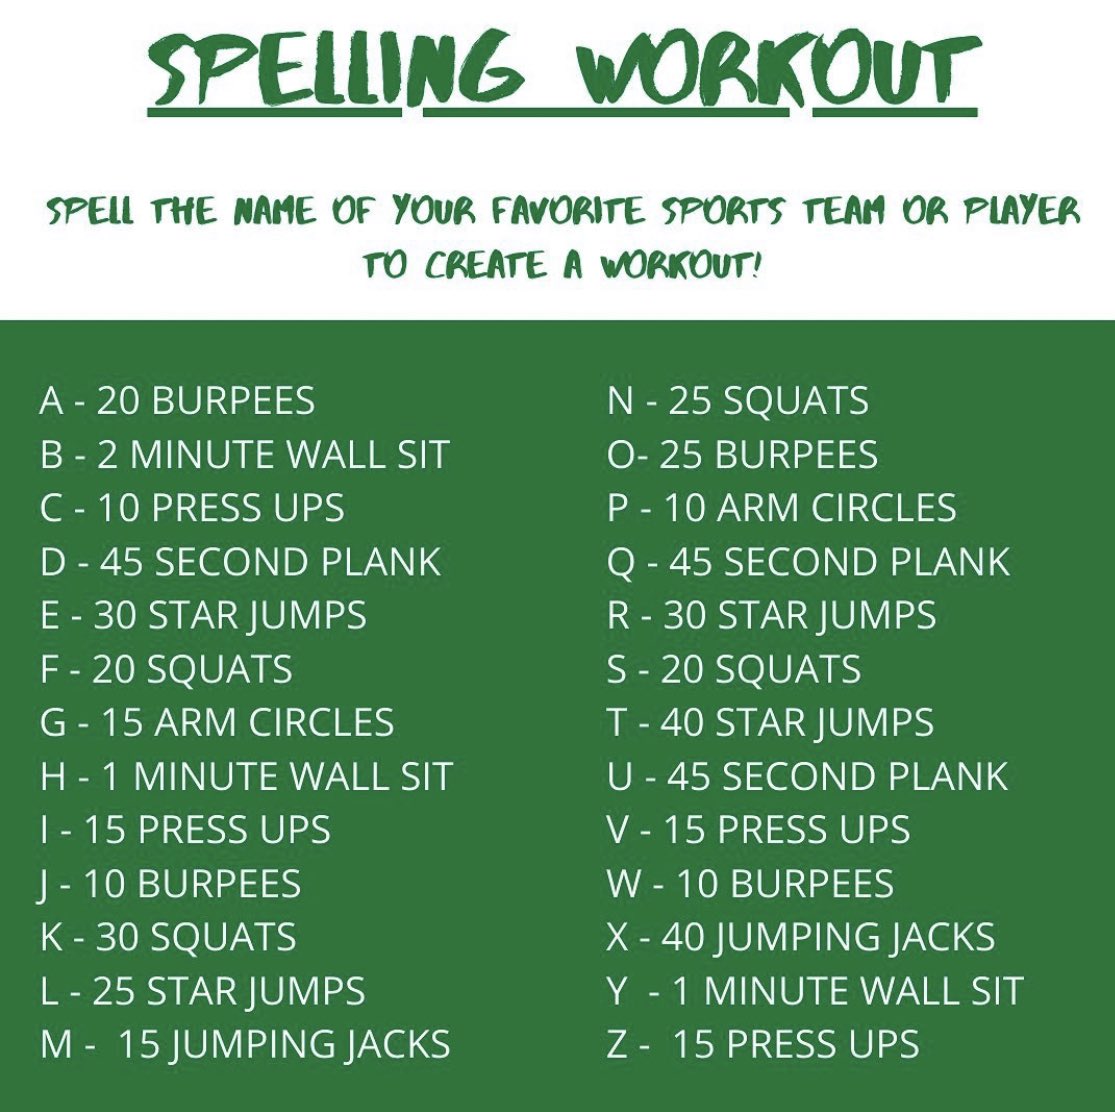 Thomas Middlecott Pe Workoutchallenge Let S See How Many Students Staff And Parents From Tmakirton Can Complete This Workout Challenge Make Sure You Comment Completed In The Comments T Co Mtmtzlycox